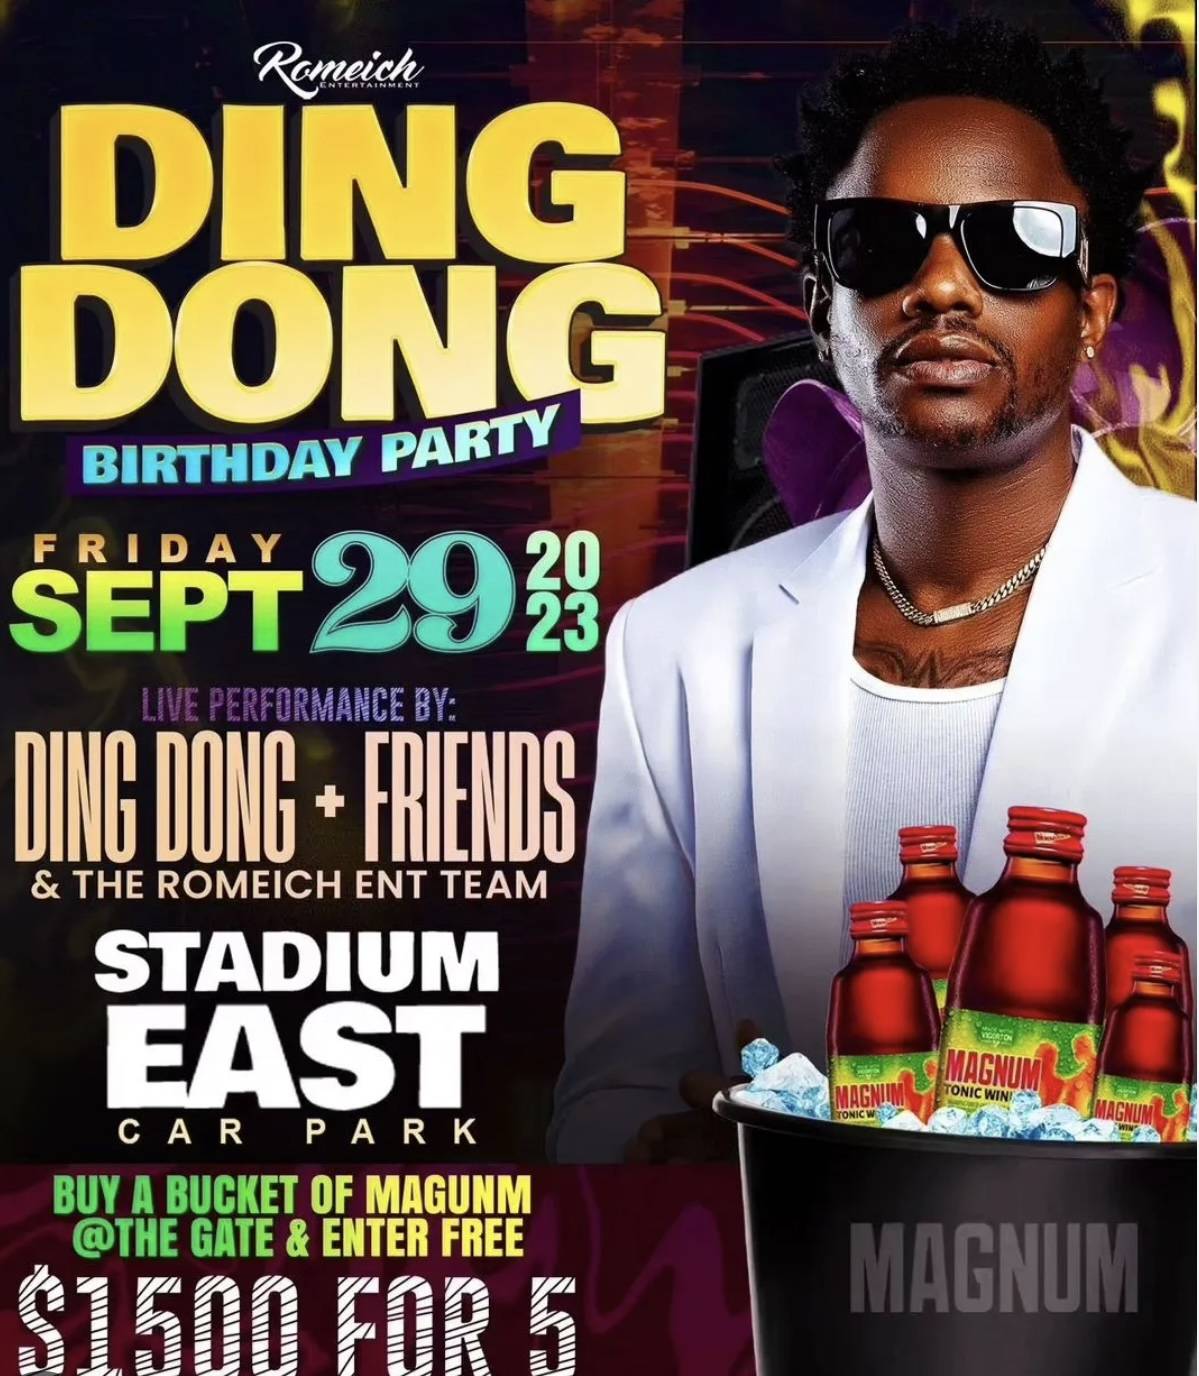 Ding Dong's birthday bash sizzles - The Caribbean Alert